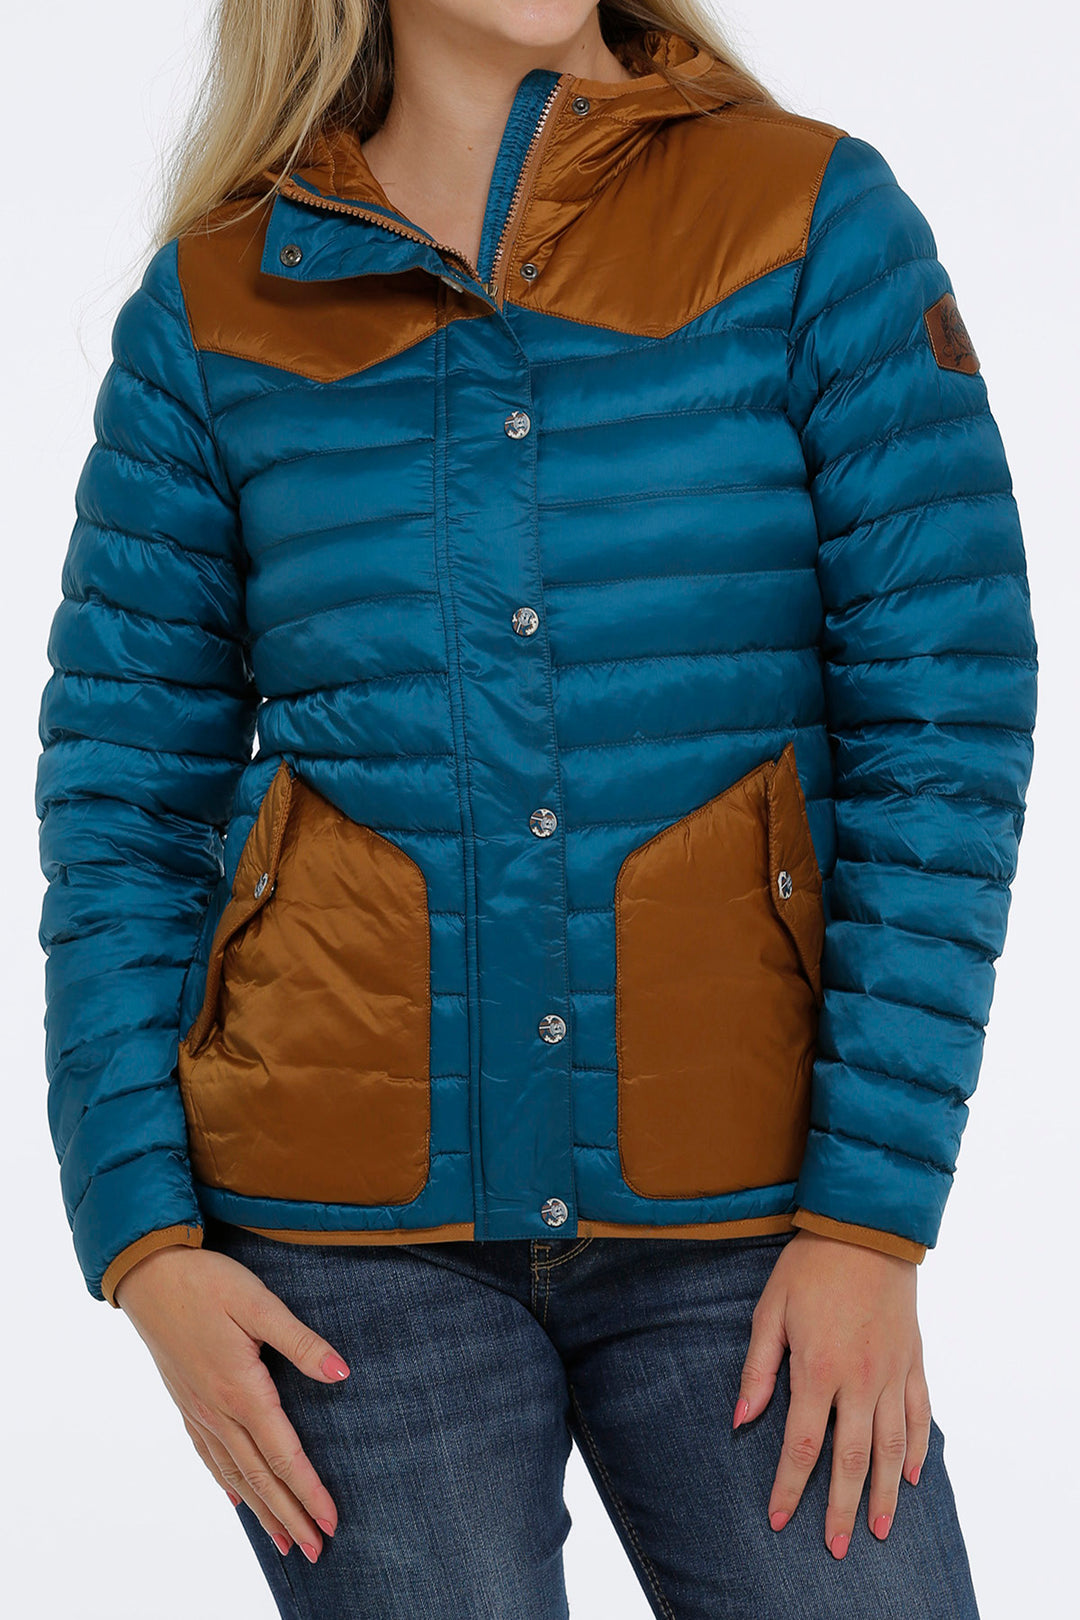 Cinch Women's Teal Quilted Jacket